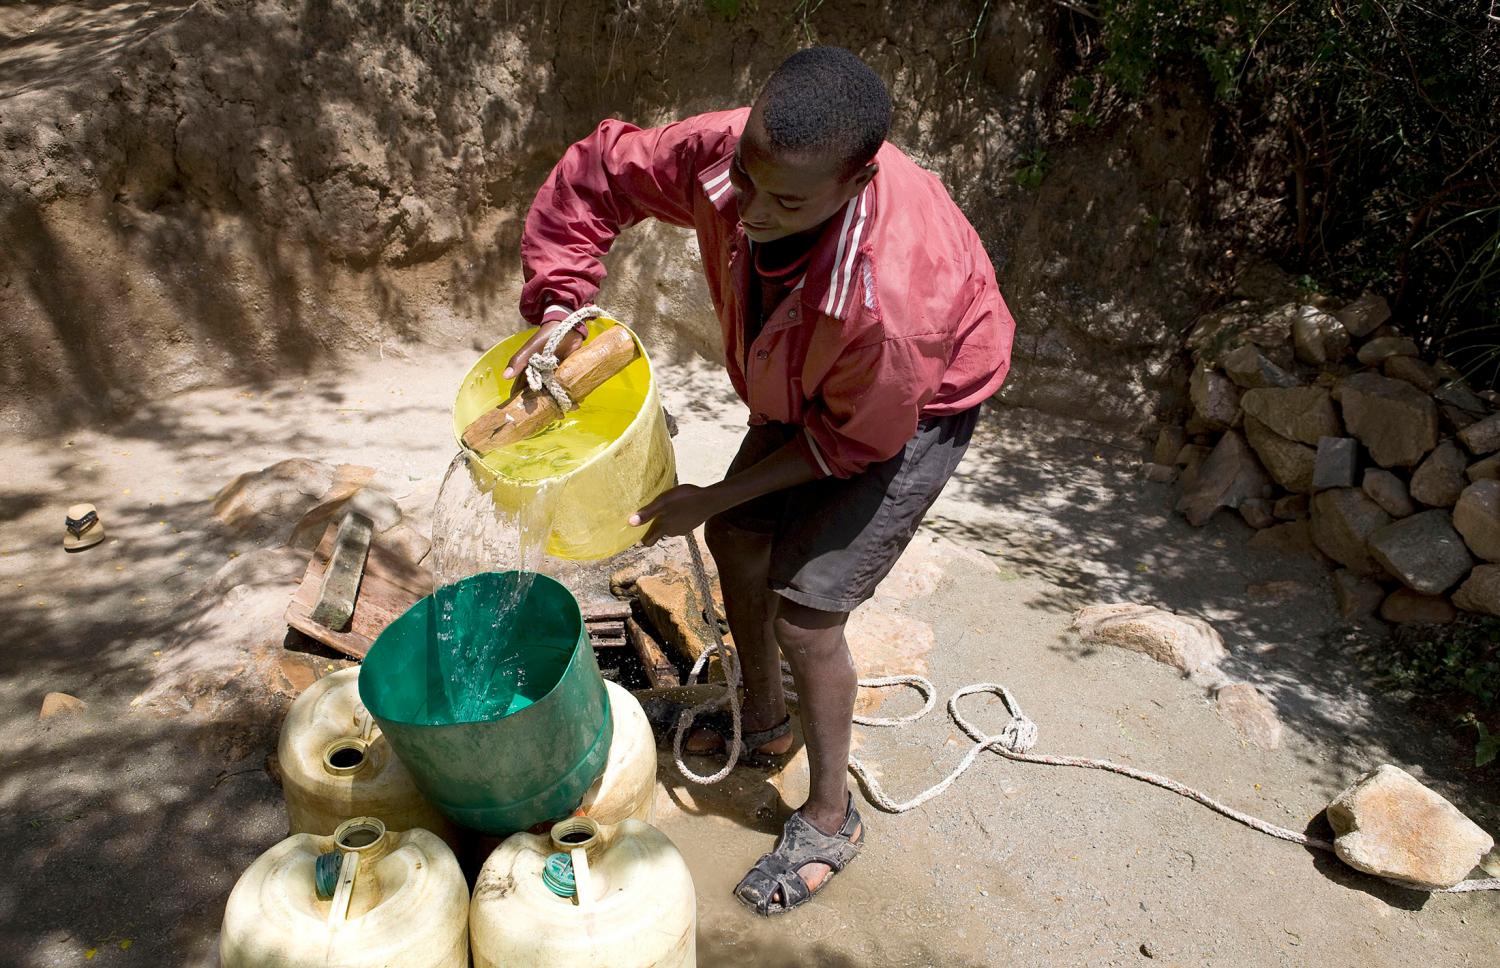 A boy collects water from a shallow well on the Kenyan side of Moyale, June 11, 2009. Prolonged drought, lack of water and limited pasture have led to conflict between the Somali and Borena ethnic groups in southern Ethiopia ? that left hundreds of people dead in February this year. The International Federation of Red Cross and Red Crescent Societies (IFRC) says it needs some 100 million Swiss francs to prevent conflict, famine and epidemics as well as restore the livelihoods of 2.5 million people in the Horn of Africa. Picture taken June 11, 2009. REUTERS/Irada Humbatova (KENYA SOCIETY CONFLICT HEALTH)